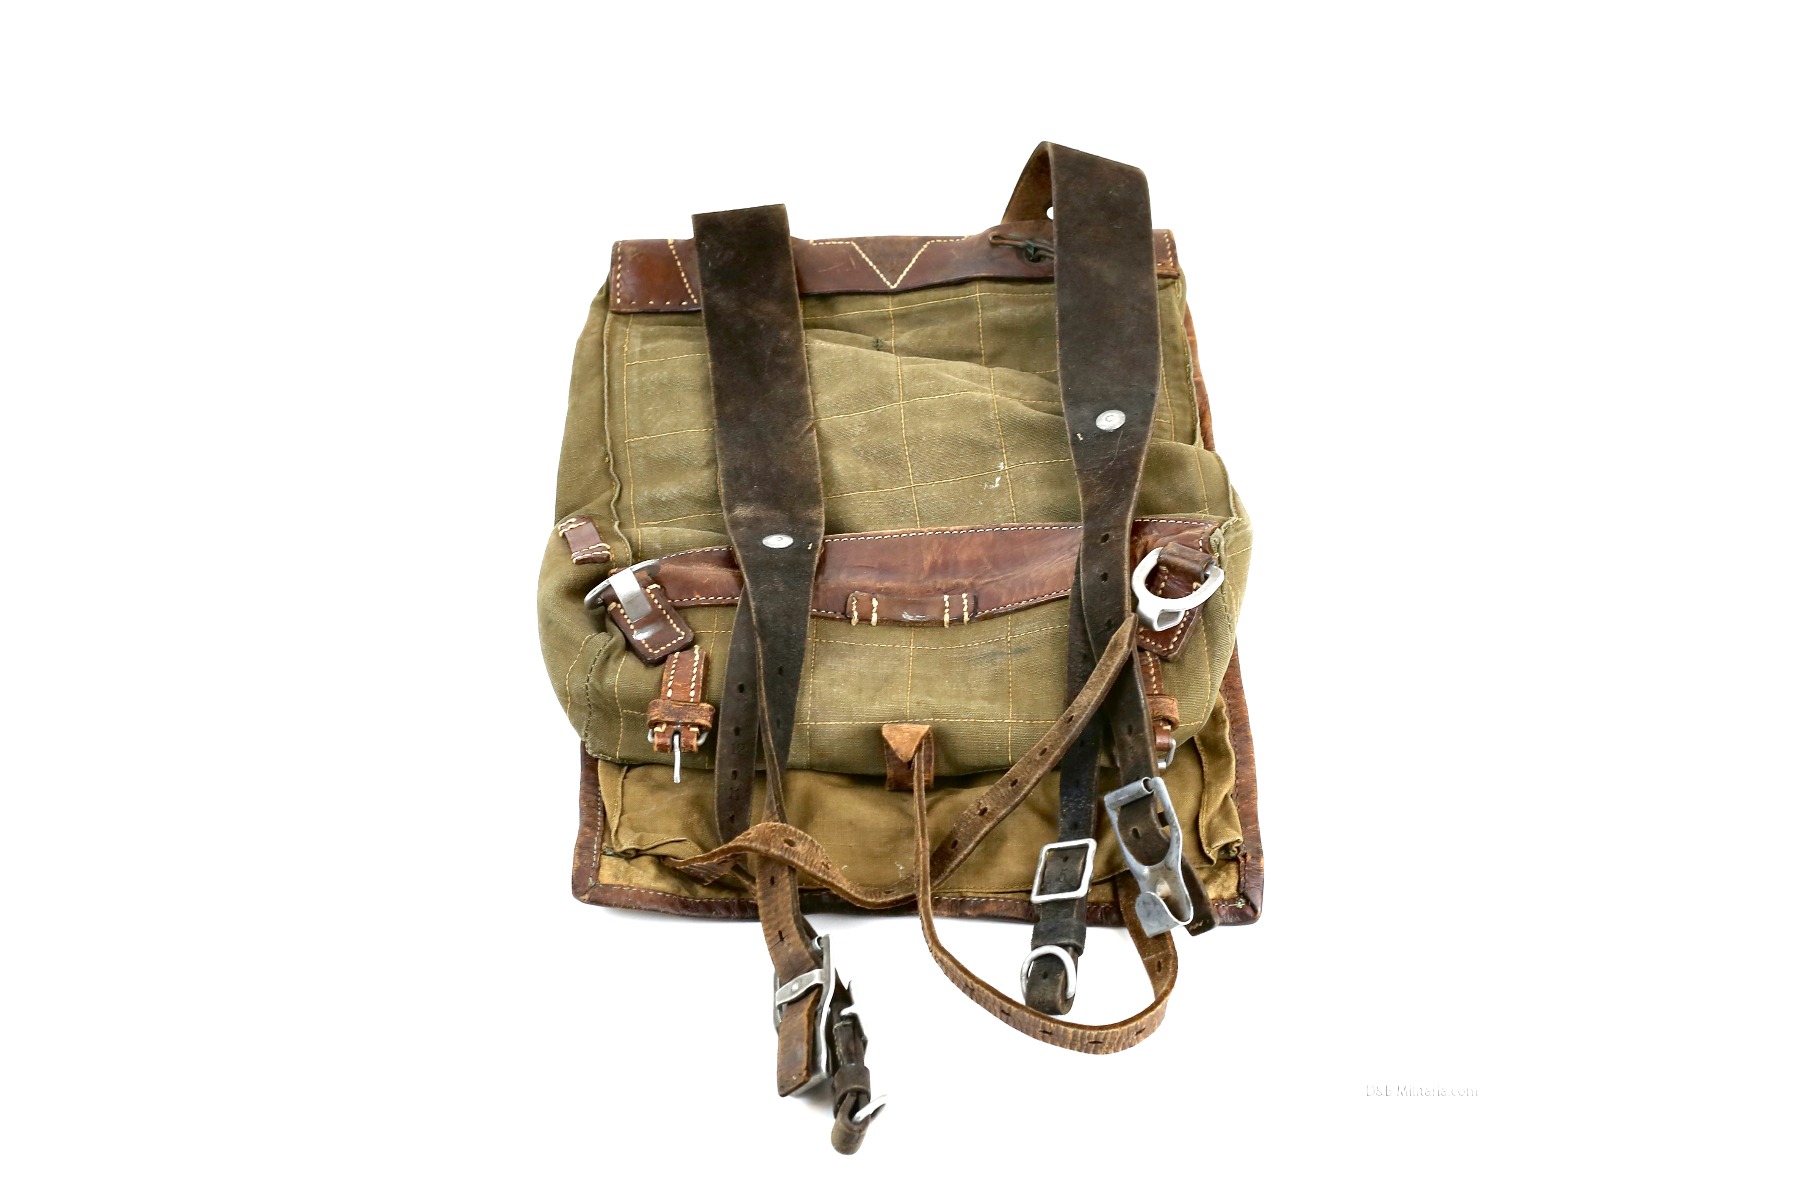 WW2 German Tornister back pack without fur (18) (UR/2B) (H)